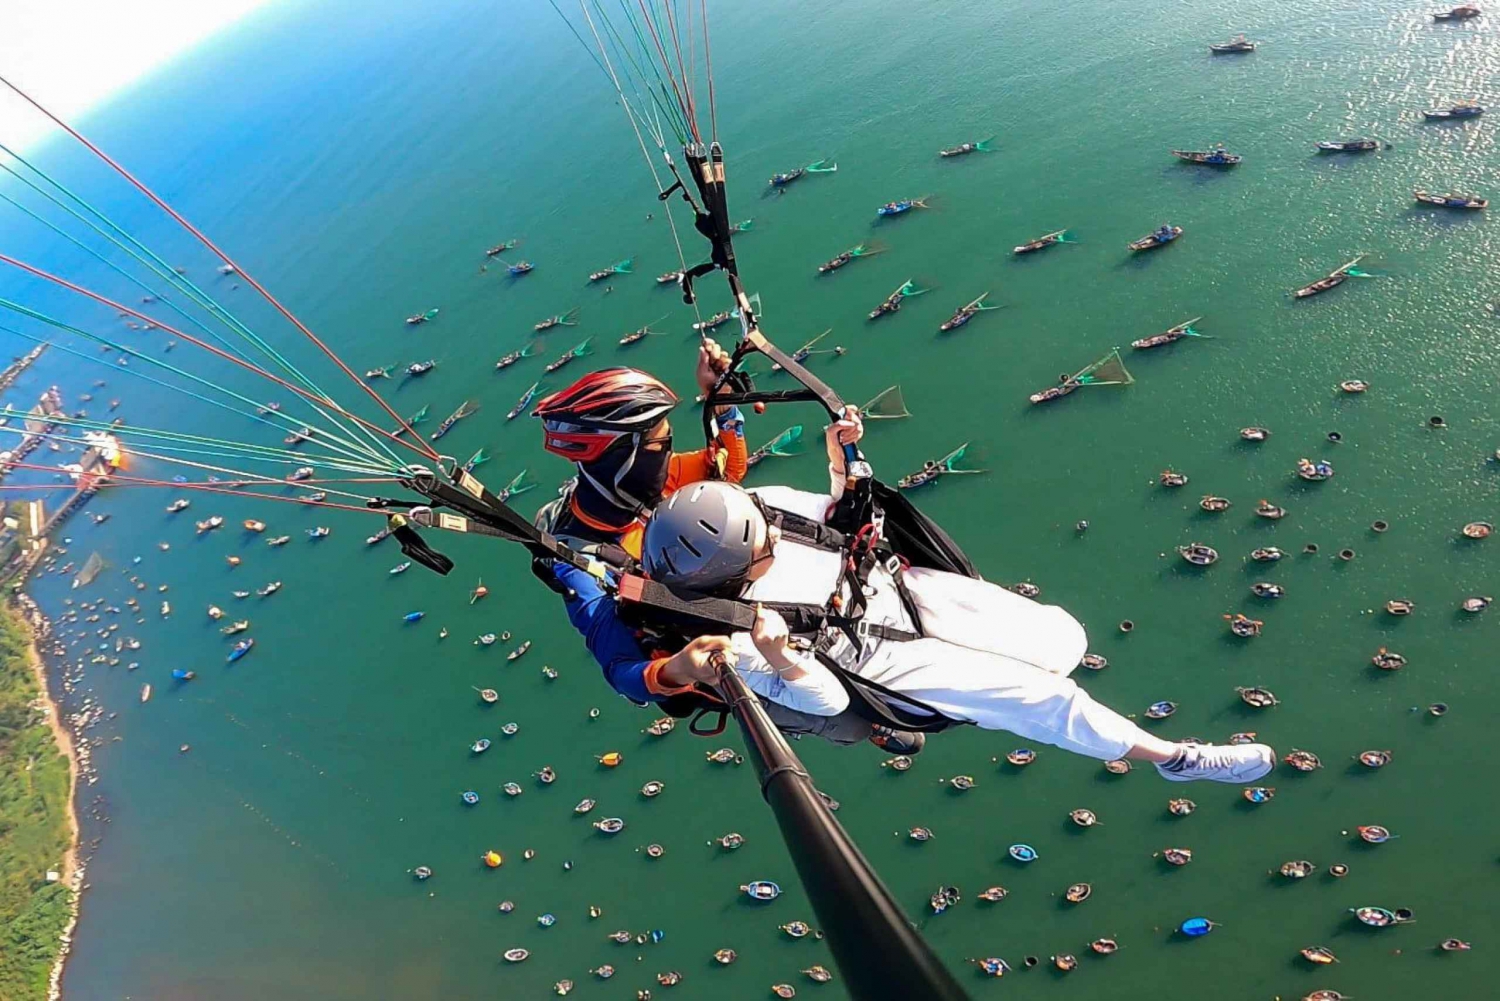 Paragliding and seeing Da Nang from above is wonderful